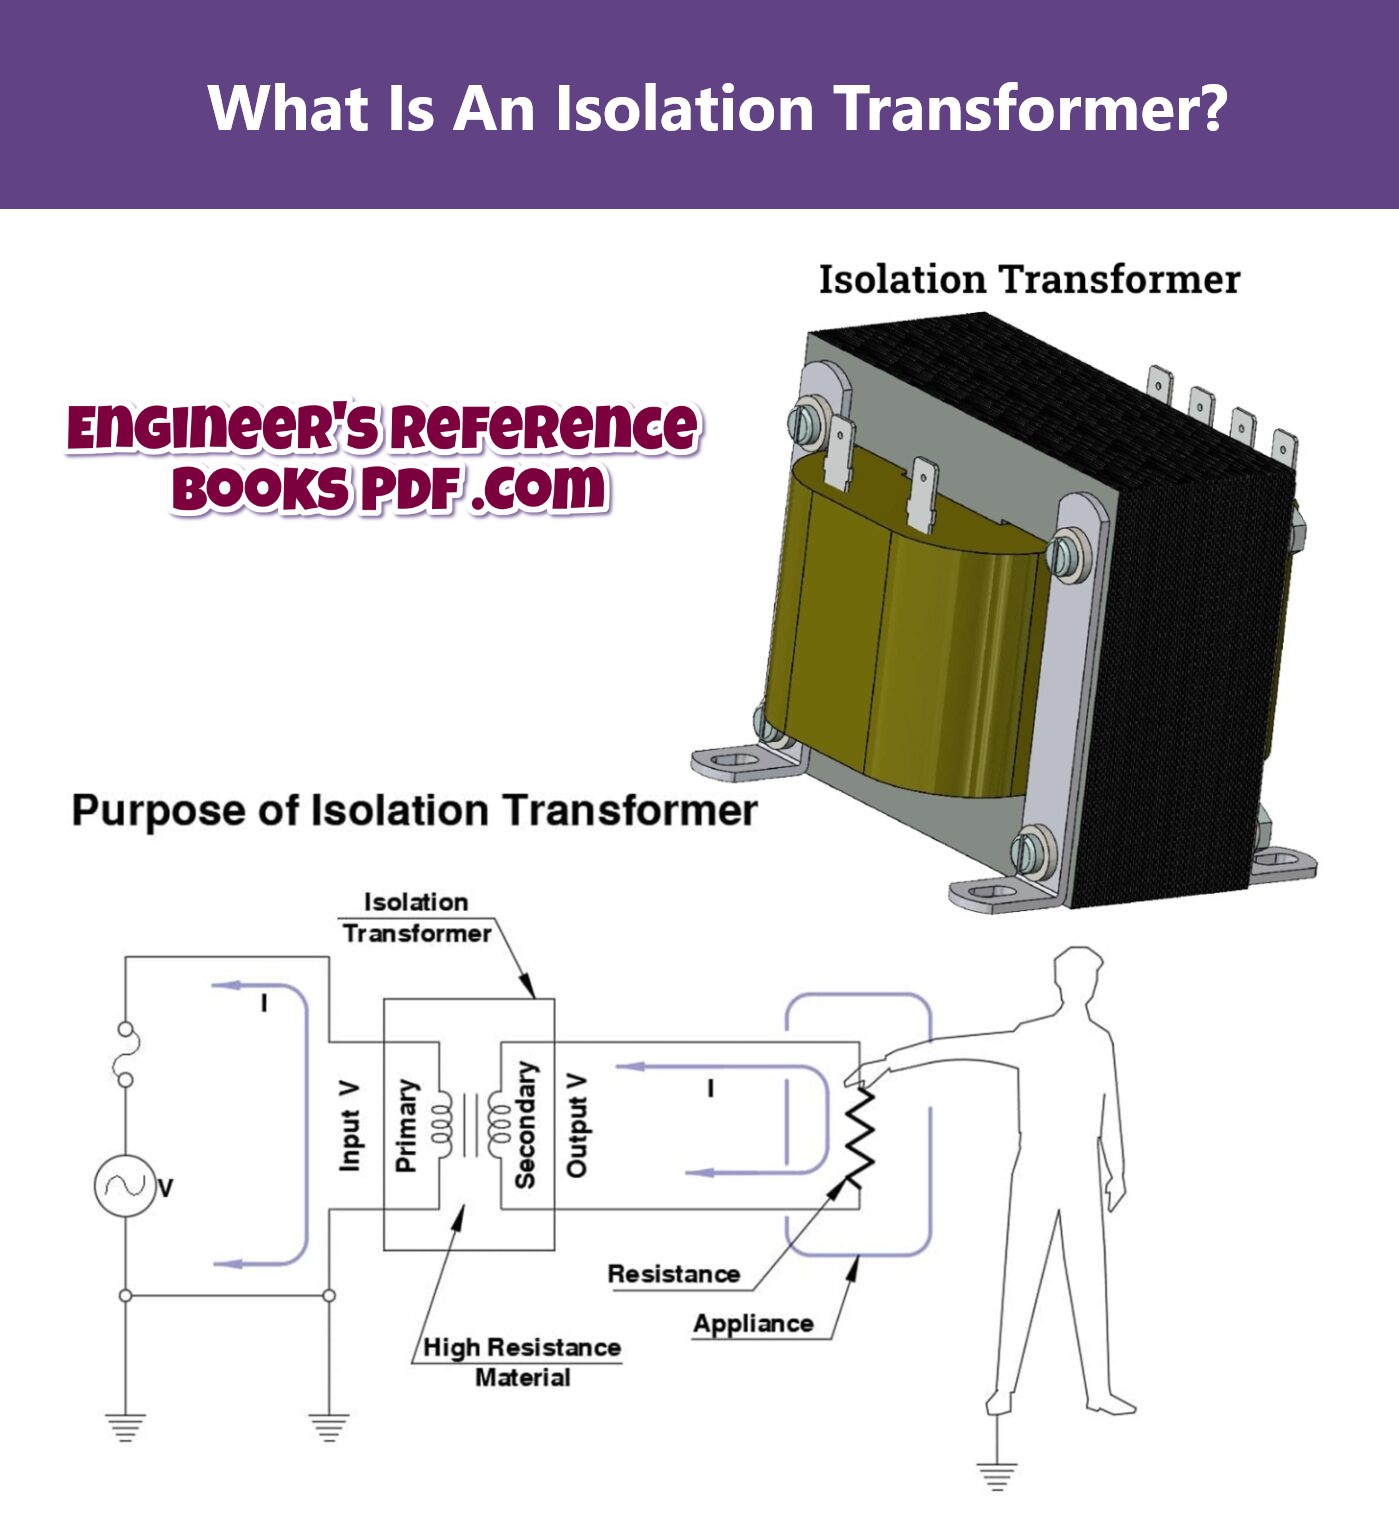 What Is An Isolation Transformer?